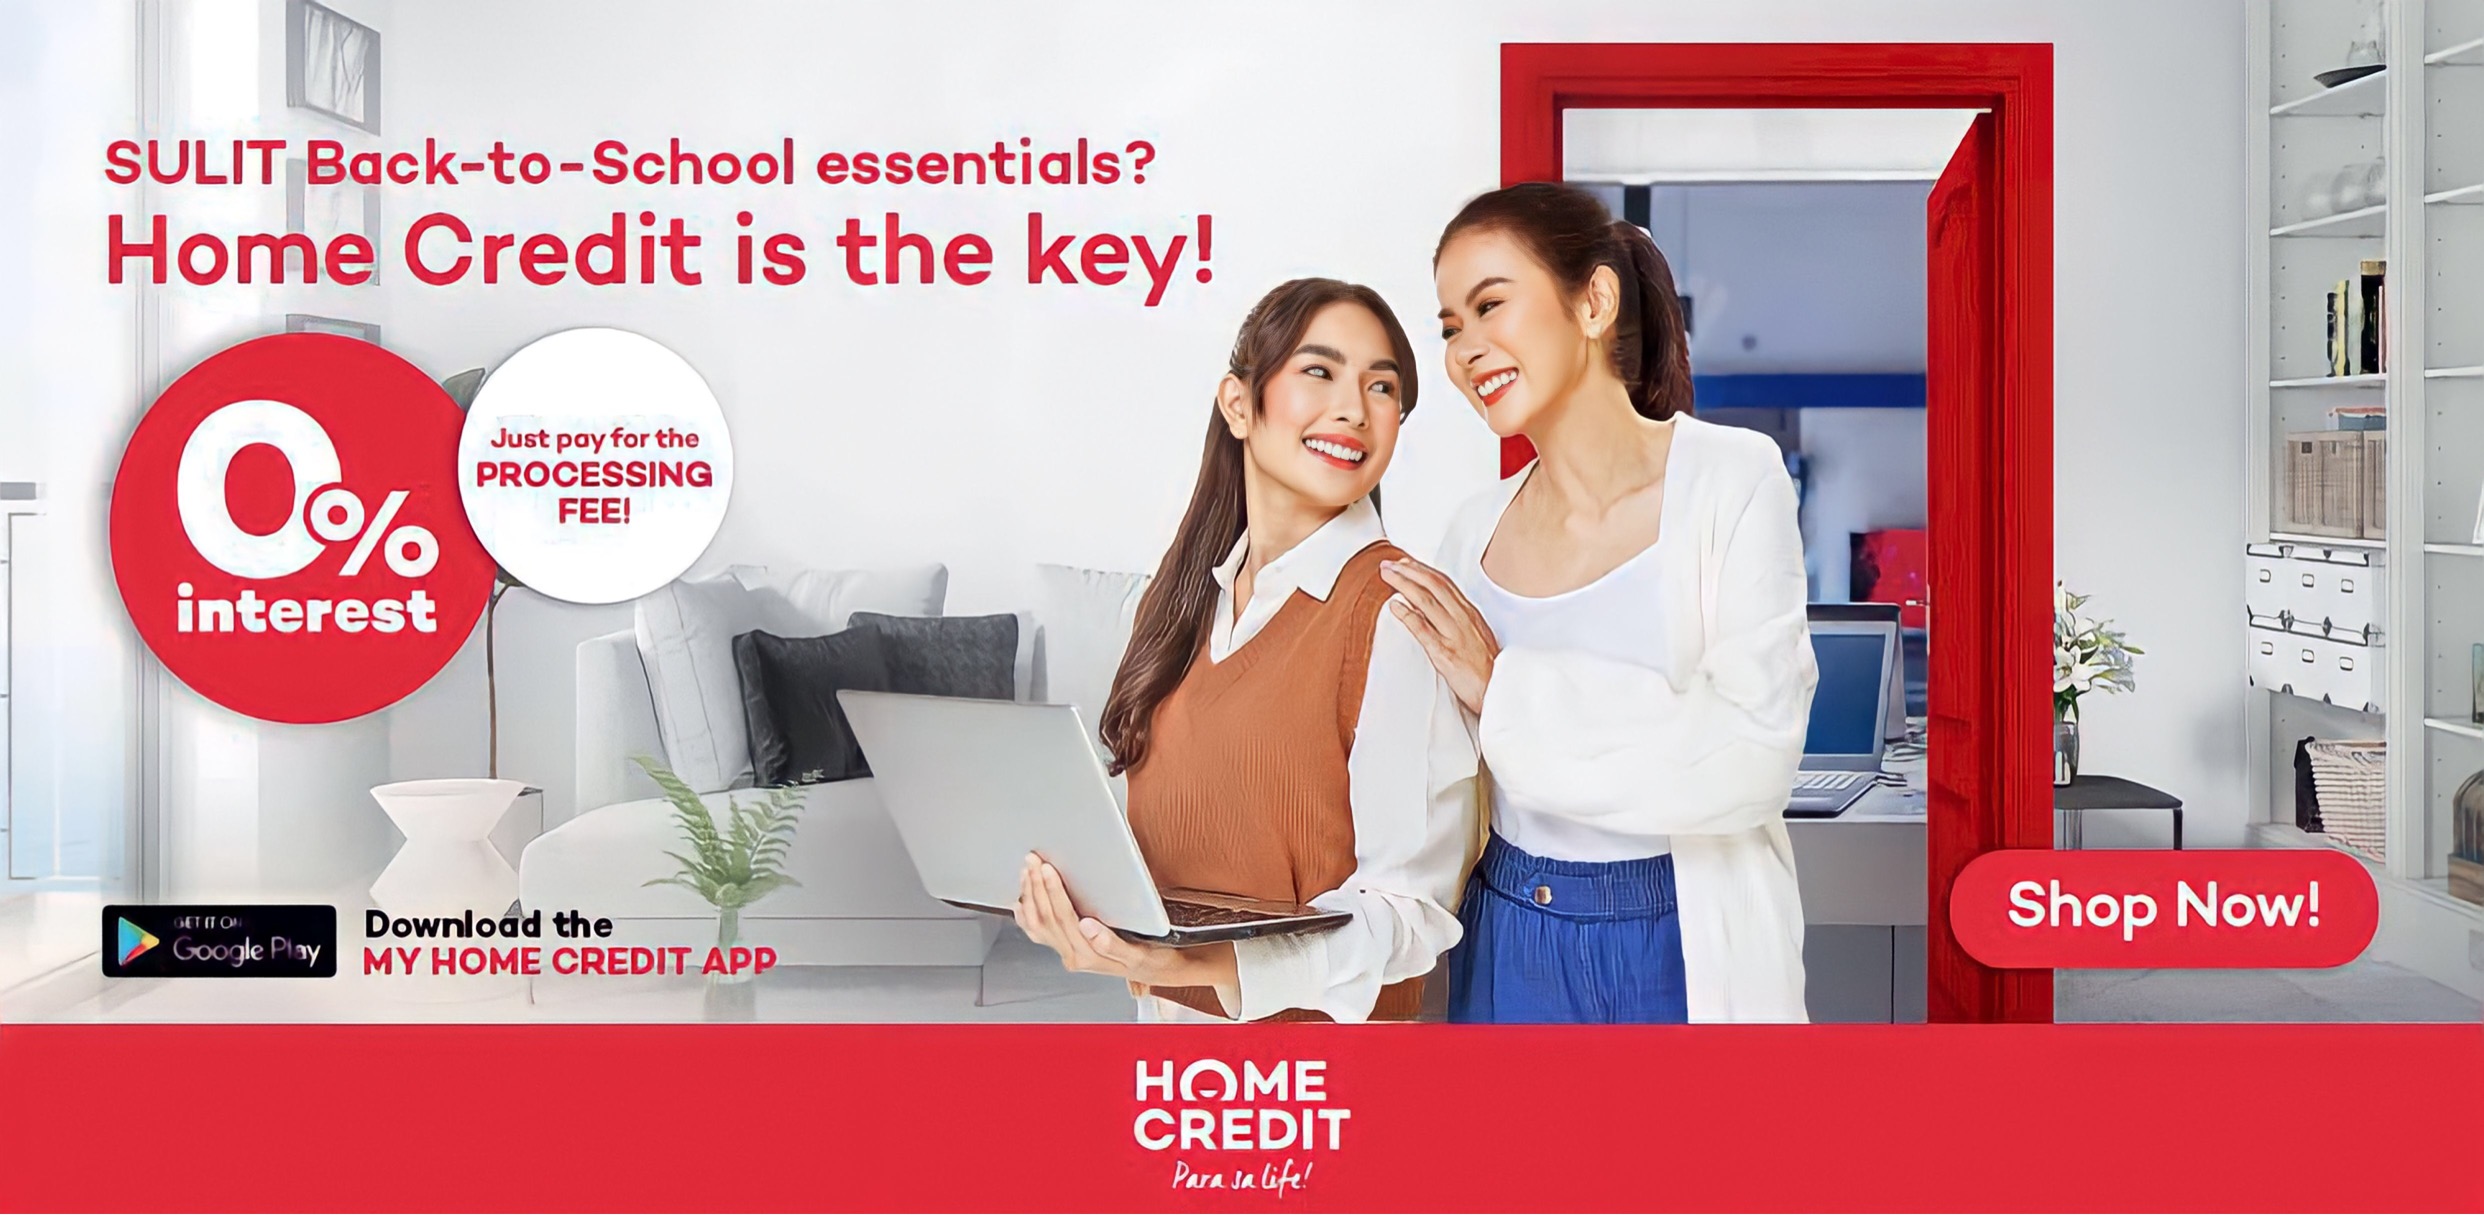 Score Great Savings on Study Gadgets this Back-to-School Season with Home Credit